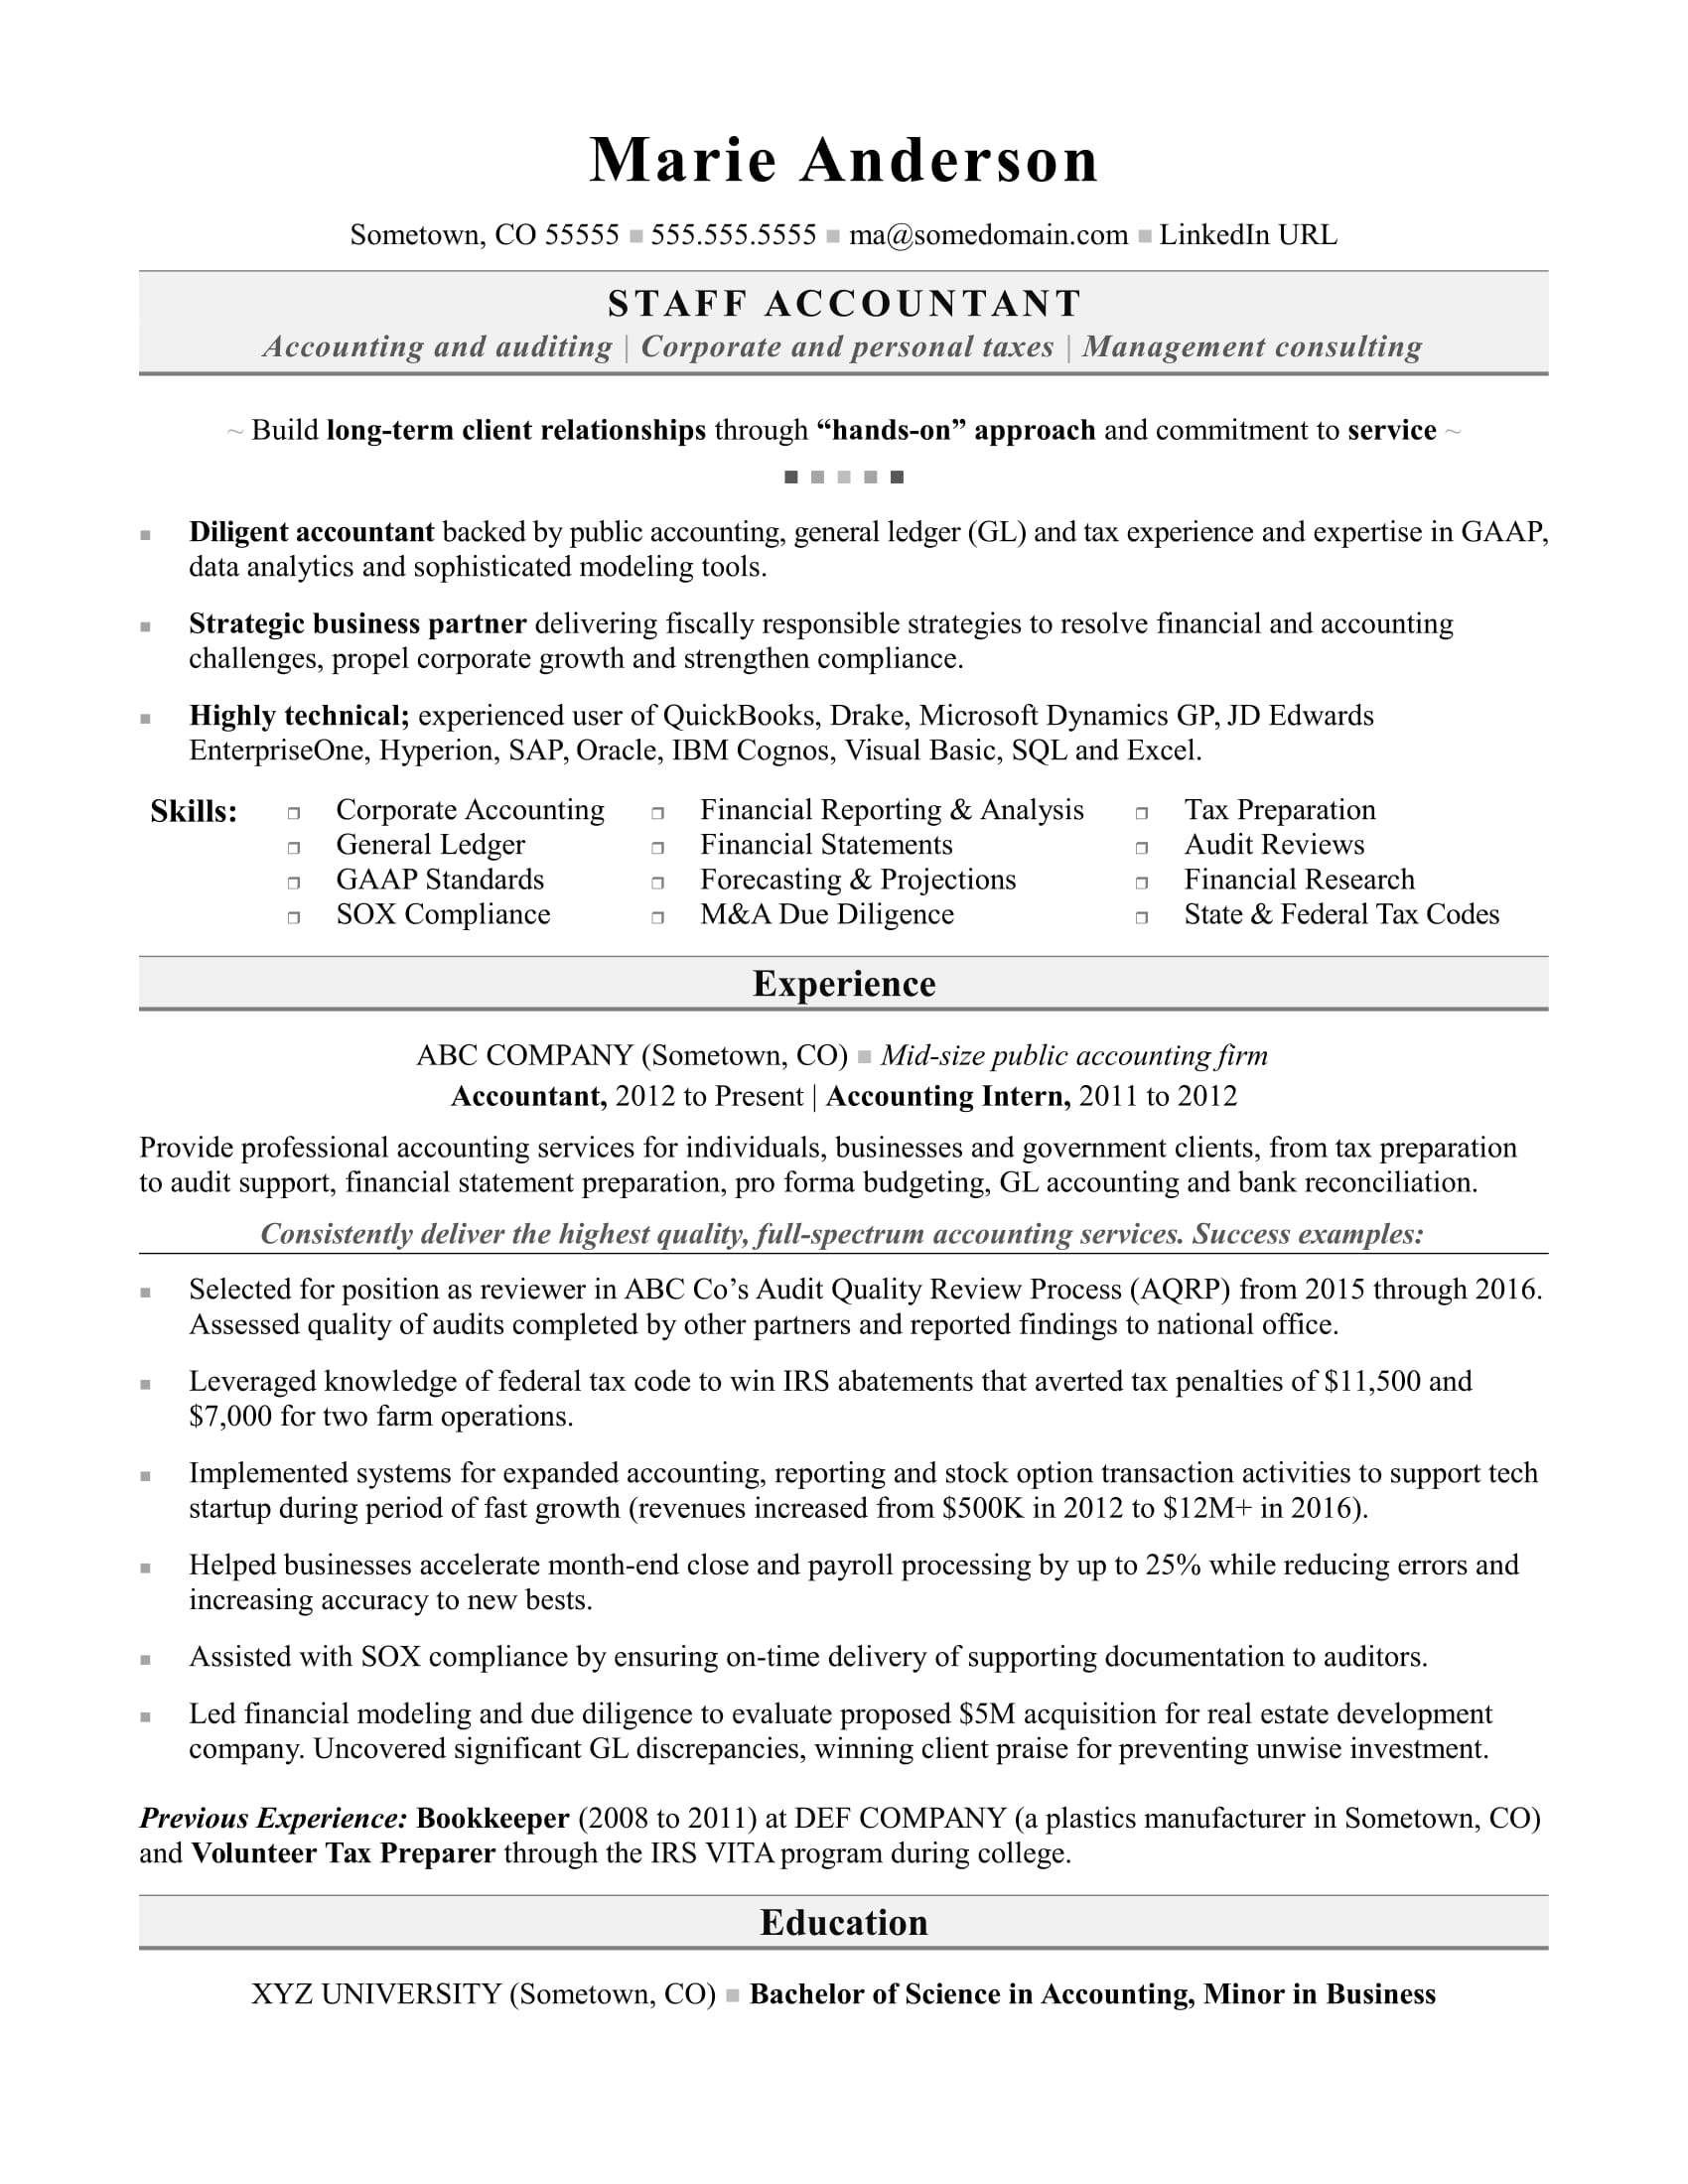 accountant resume format april onthemarch co